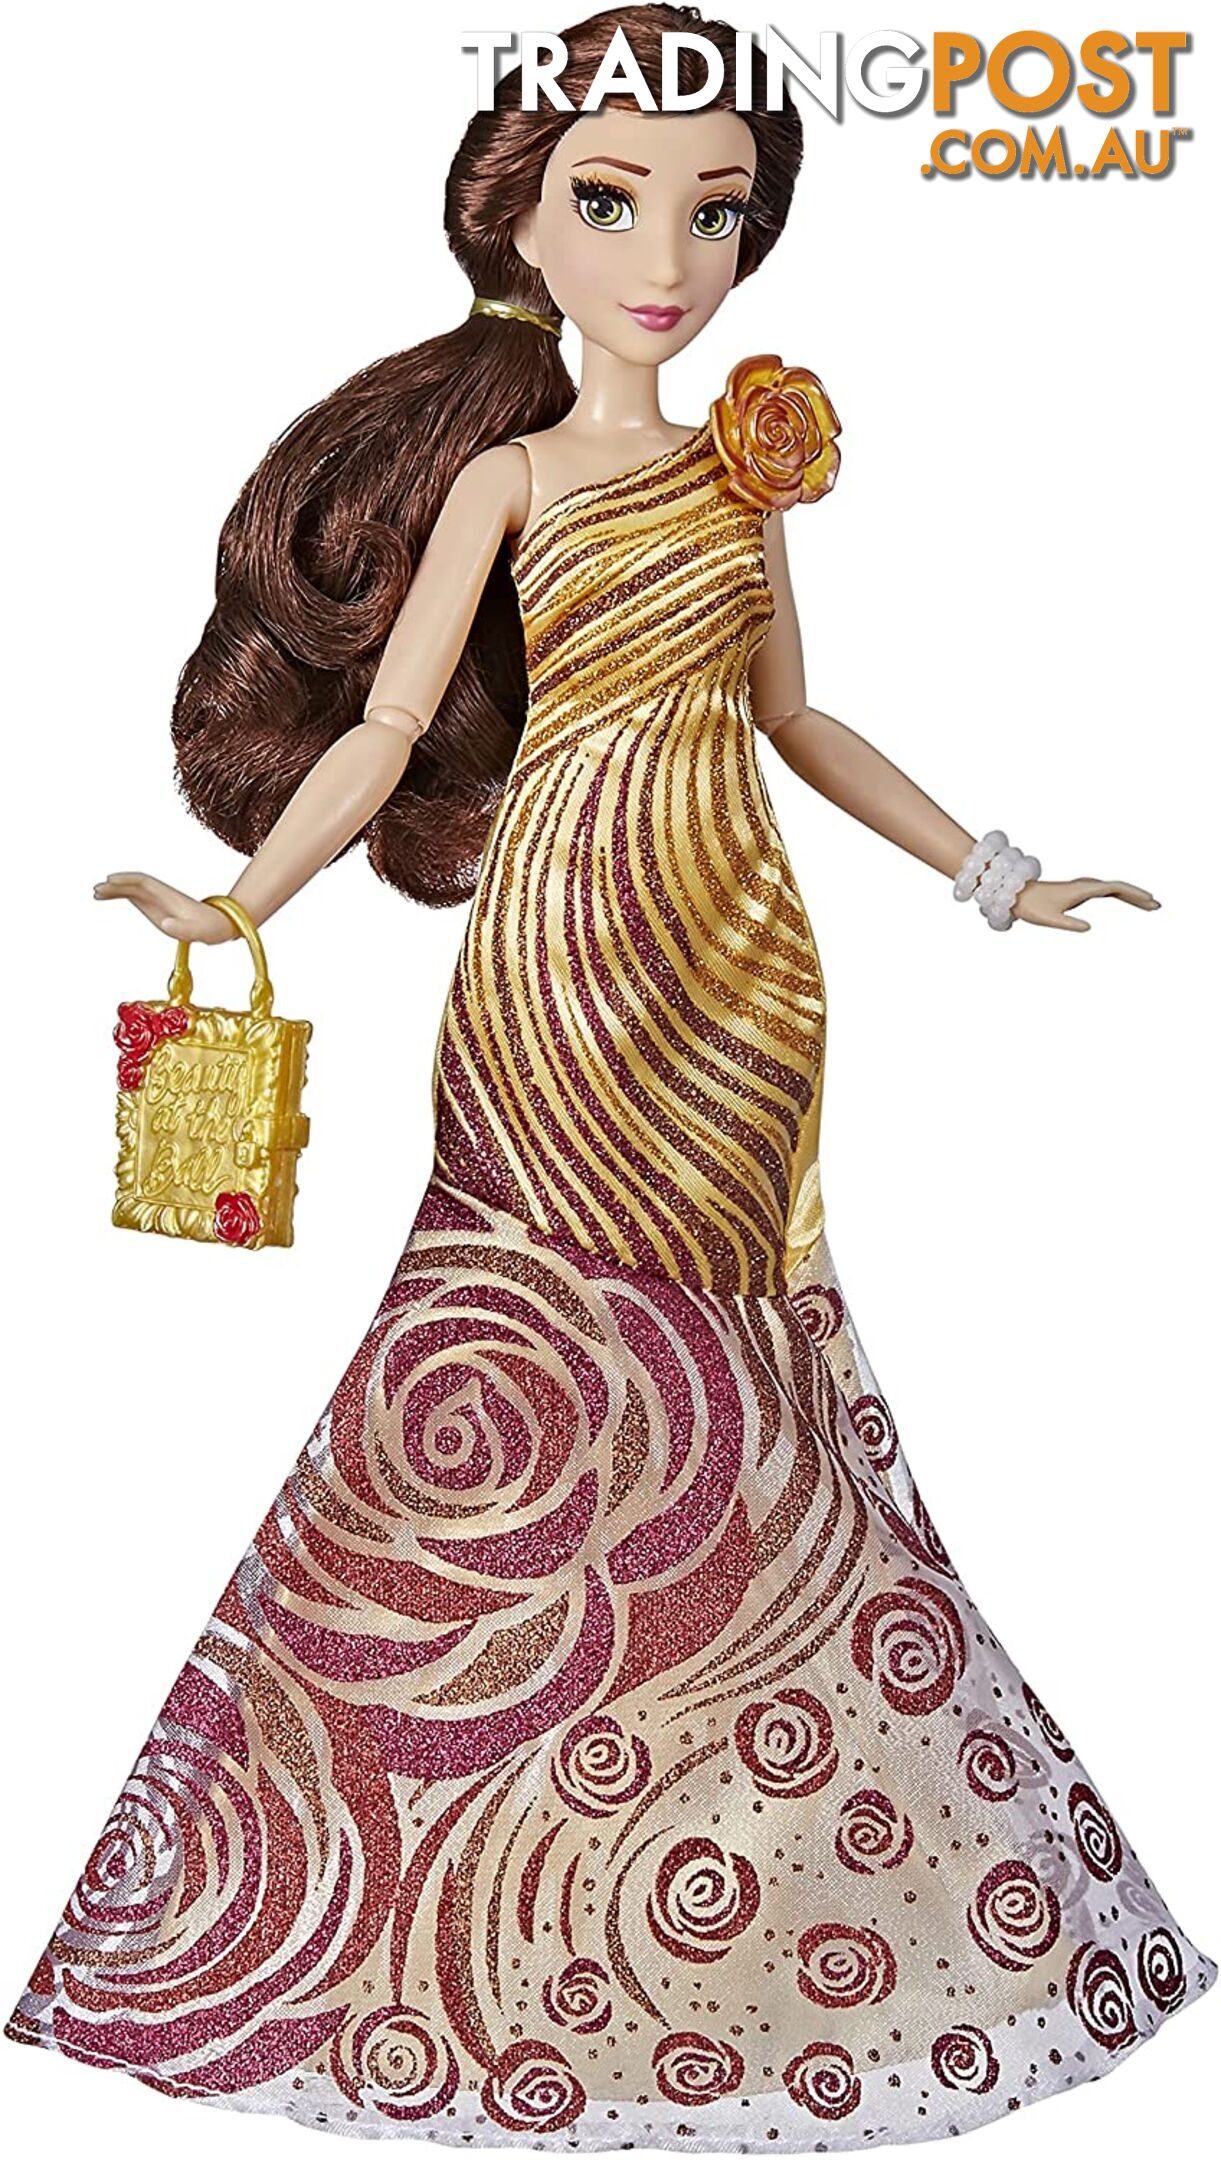 Disney Princess Belle Series 12 Fashion Doll With Clothes And Accessories Hbf17005x00 - 5010993861606